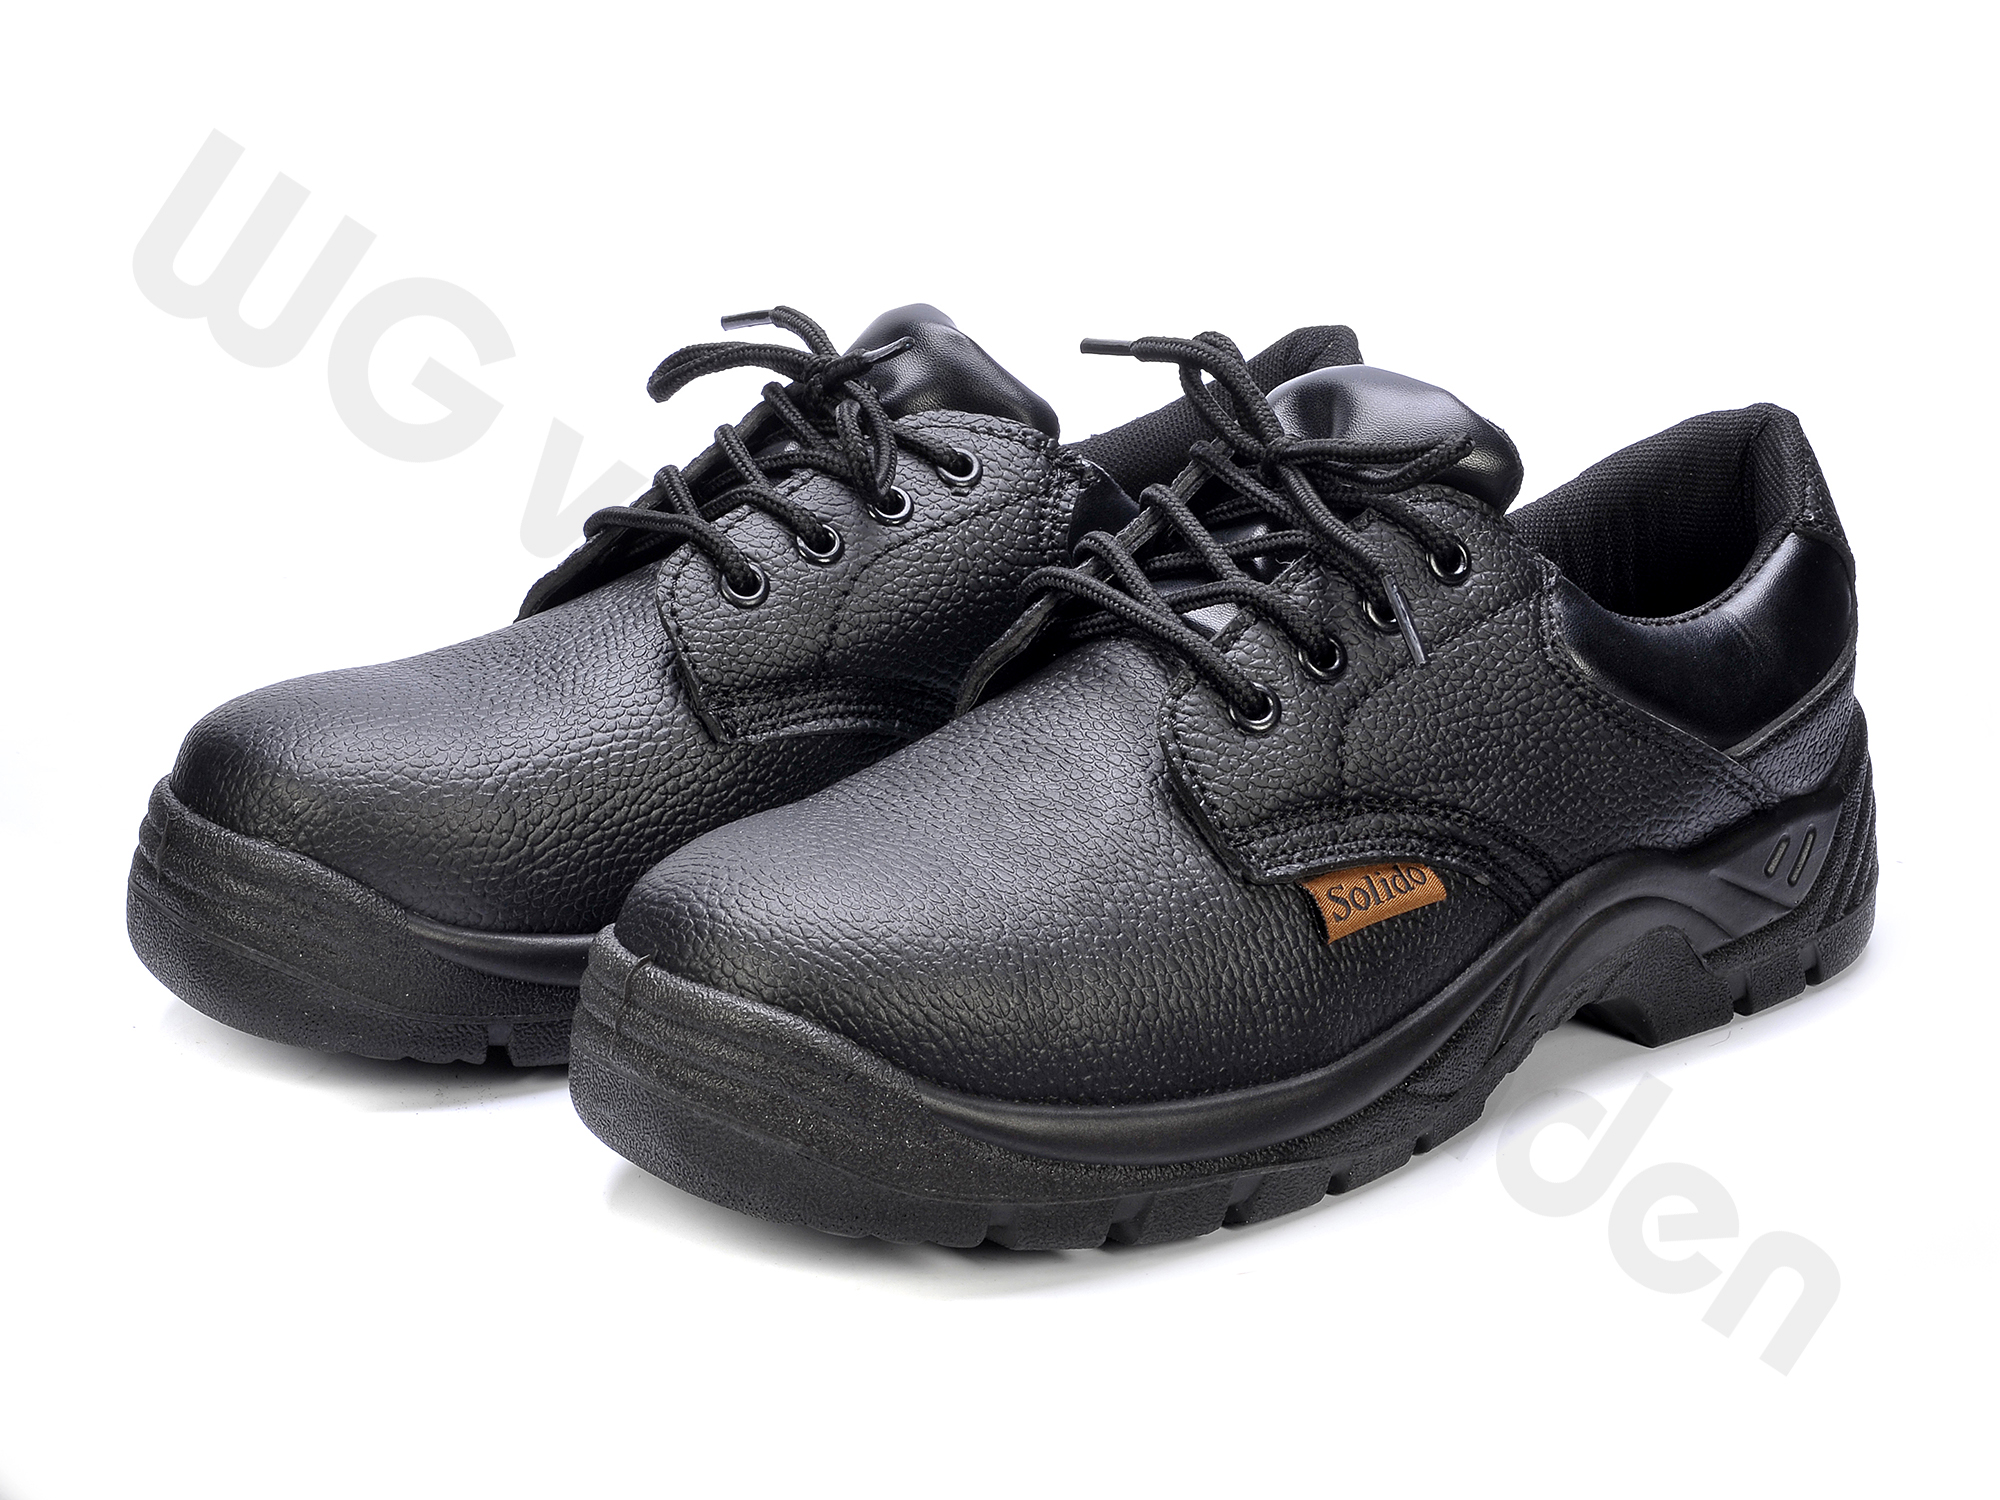 880609 SHOES SAFETY S1 WITH STEEL TOE SIZE 46 / 29CM CE